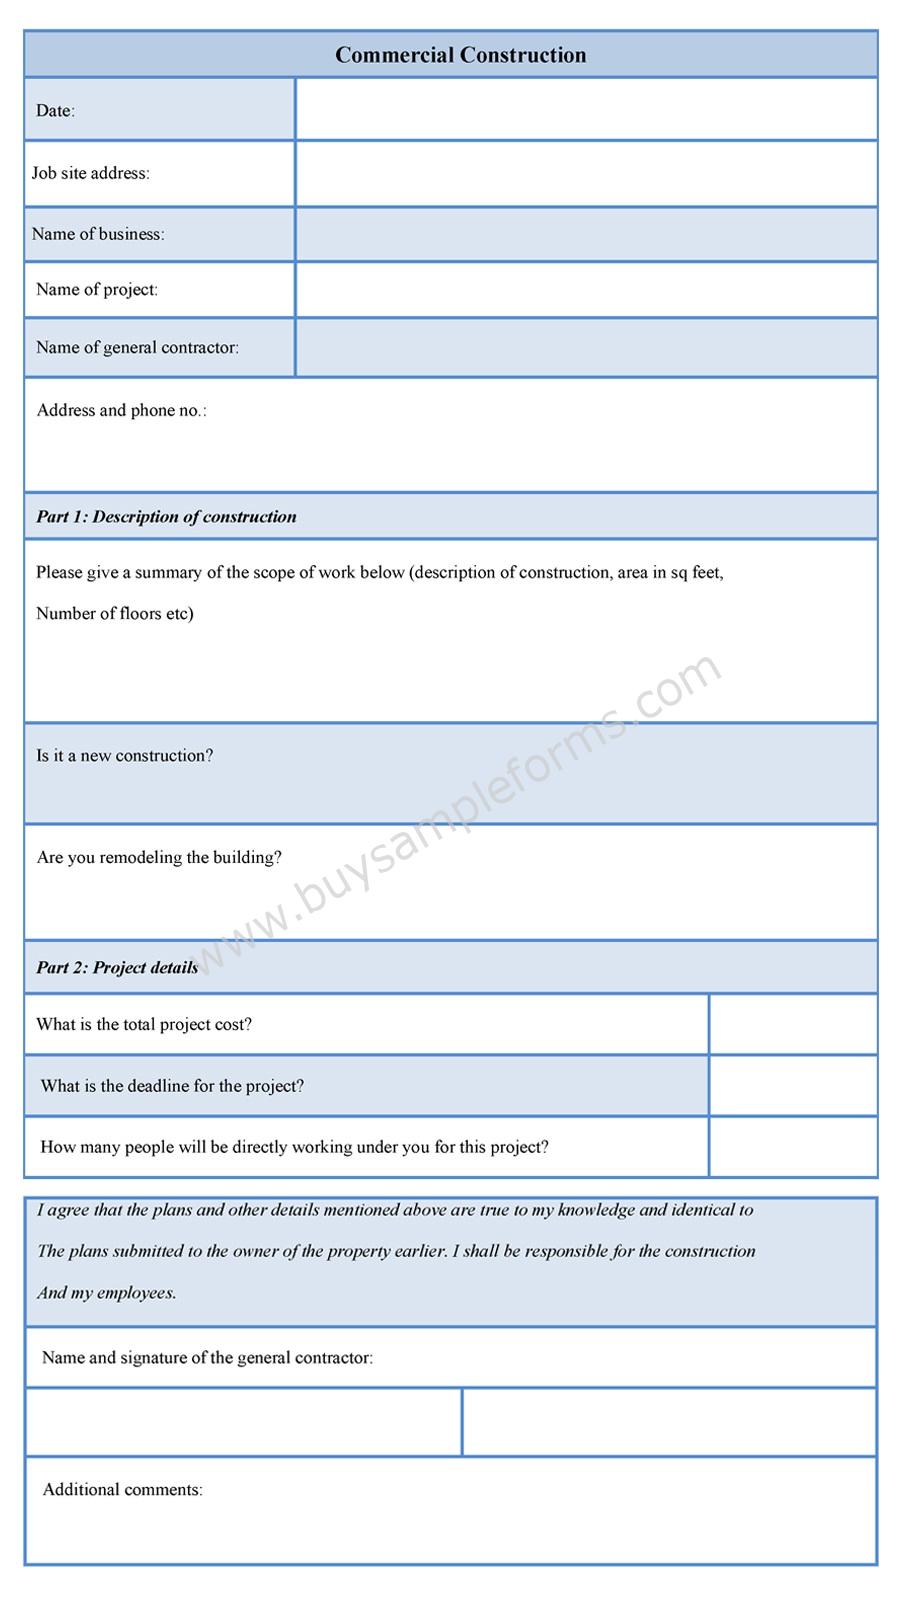 Commercial Construction Form